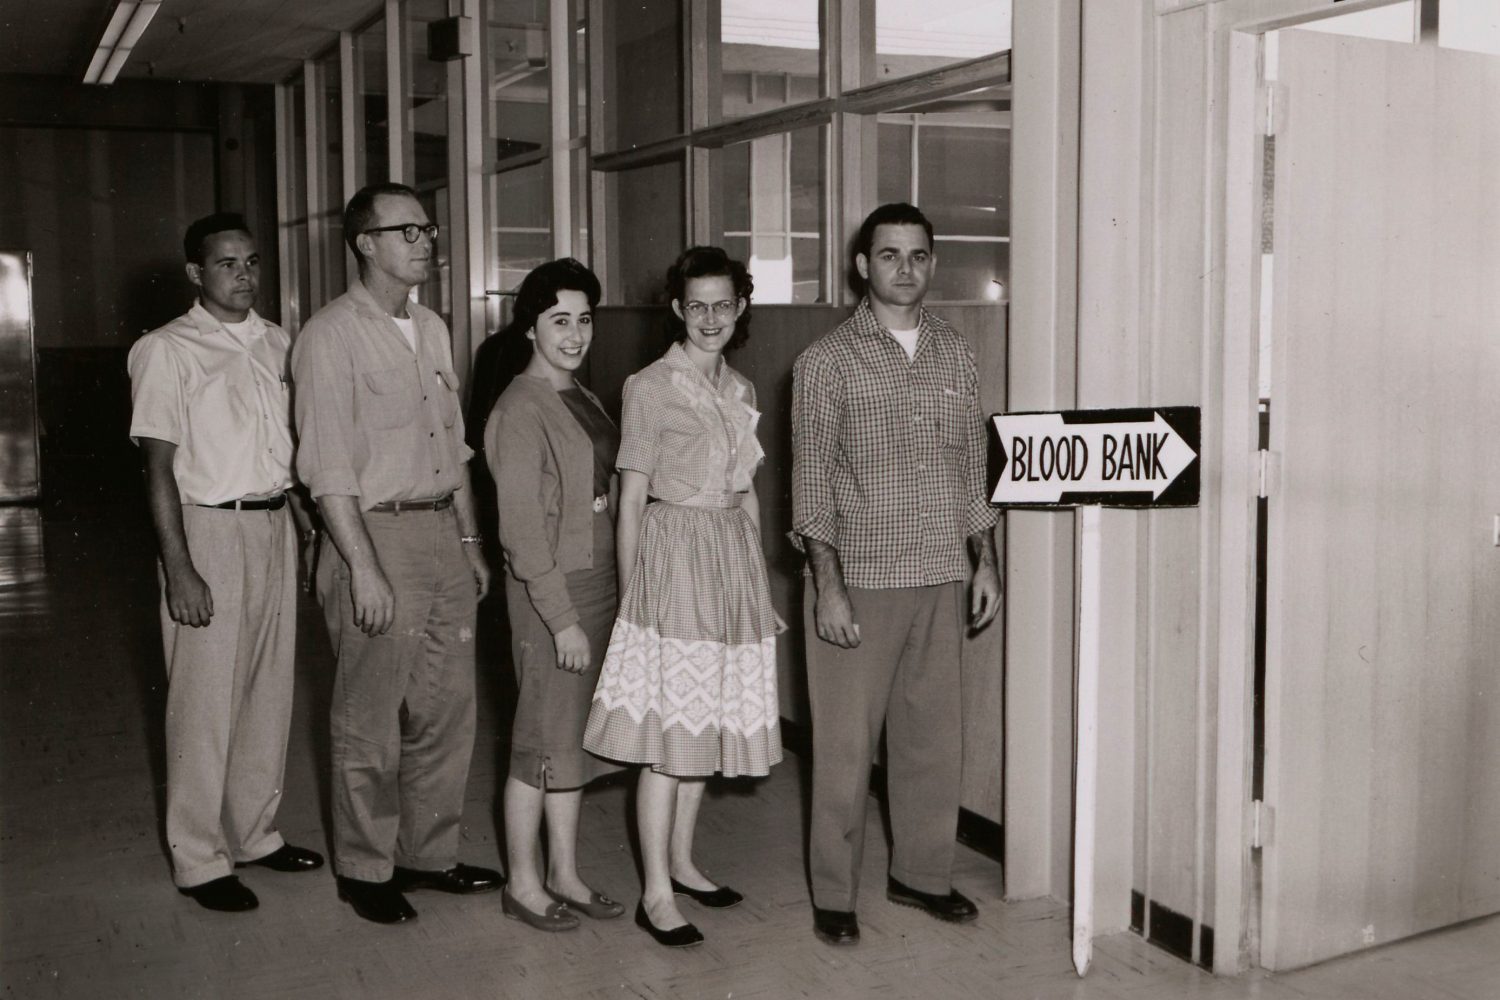 Hewlett-Packard employees lined up to donate blood in the 1960s.